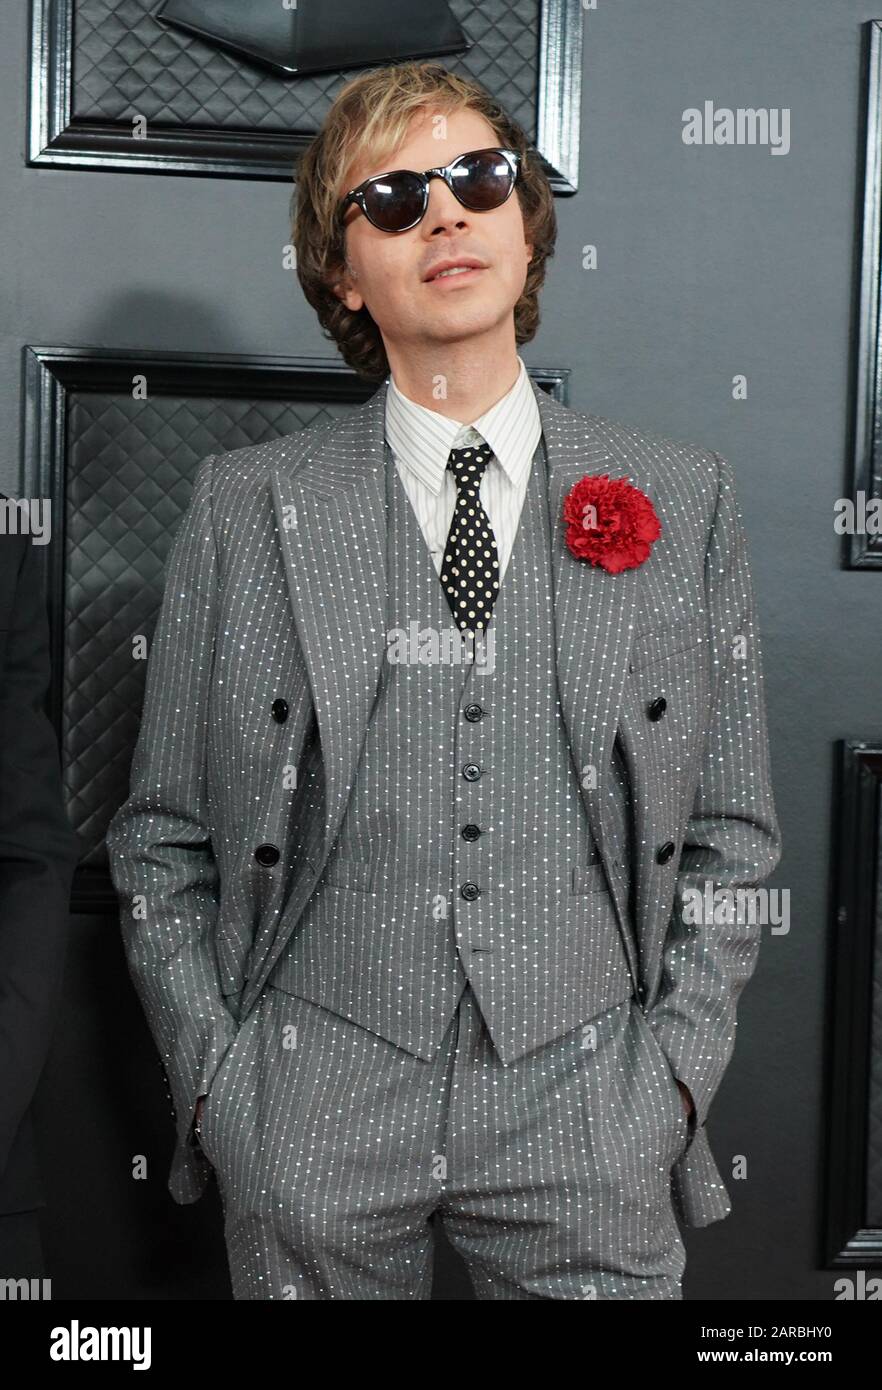 LOS ANGELES, CA - JANUARY 26: Beck at the 62nd Grammy Awards at the Staples Center in Los Angeles, California on January 26, 2020. Credit: Tony Forte/MediaPunch Stock Photo